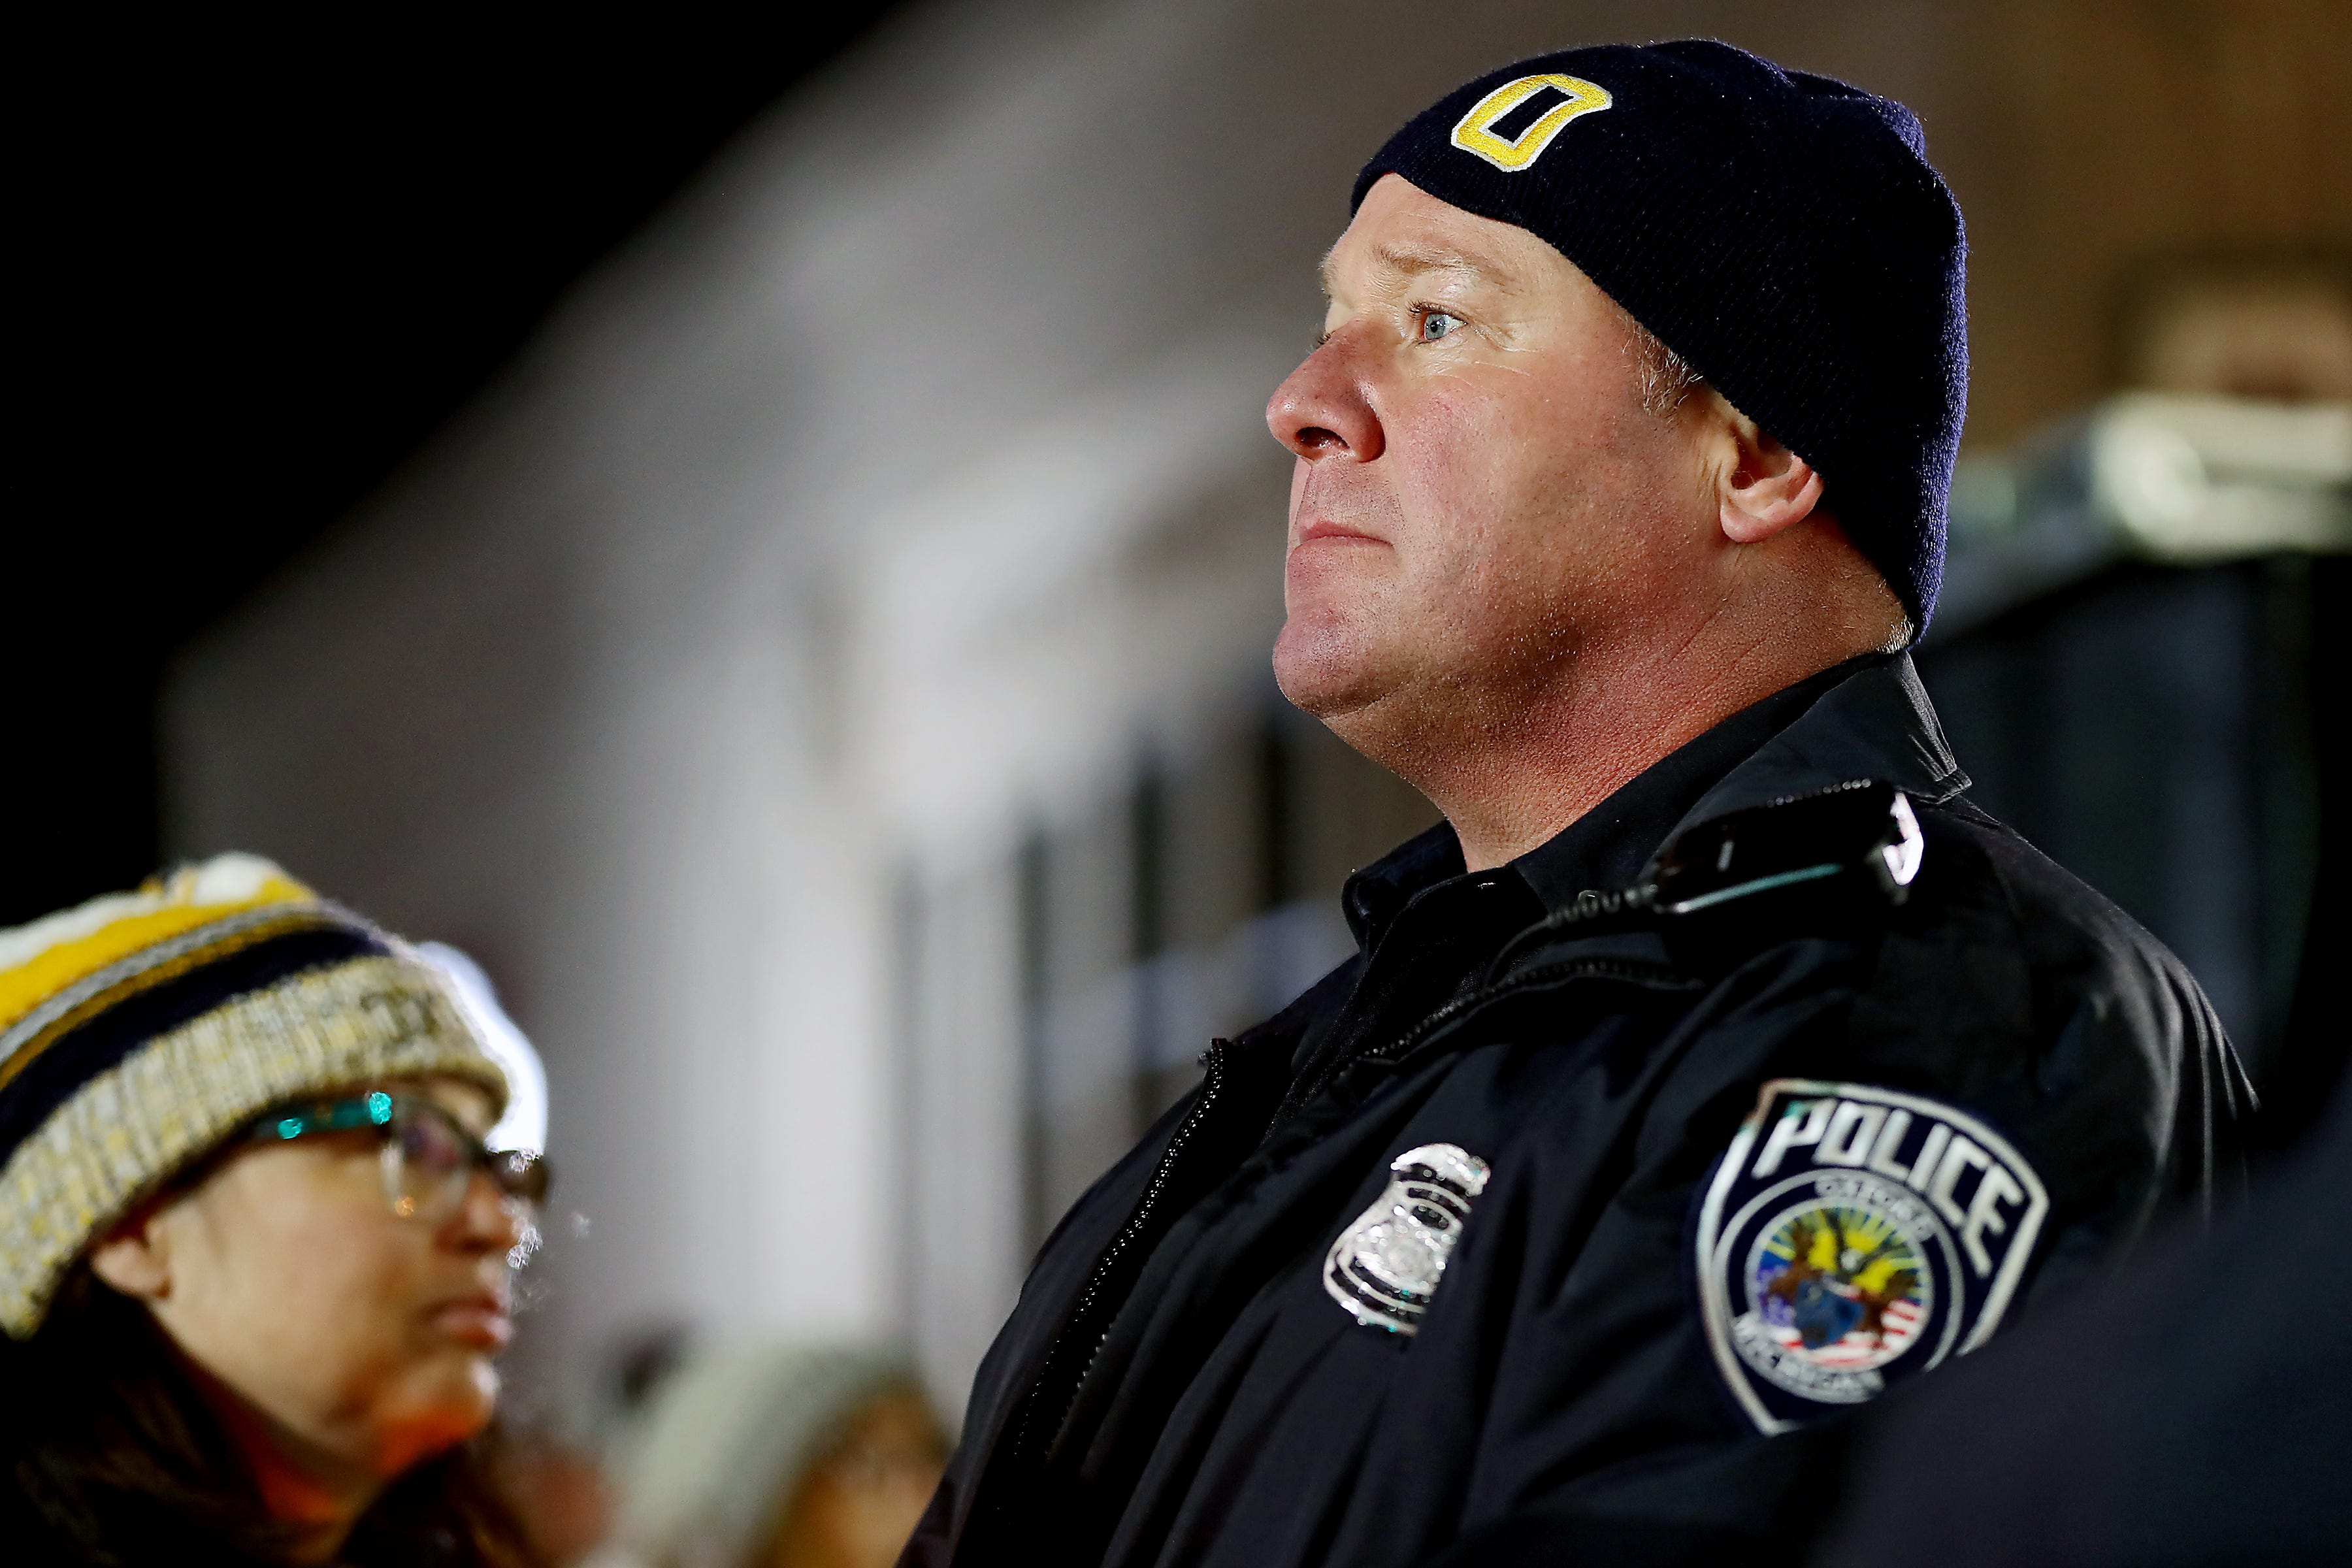 An Oxford police officer stands watch during a candlelight vigil on Friday, Dec. 3, 2021 in downtown Oxford.